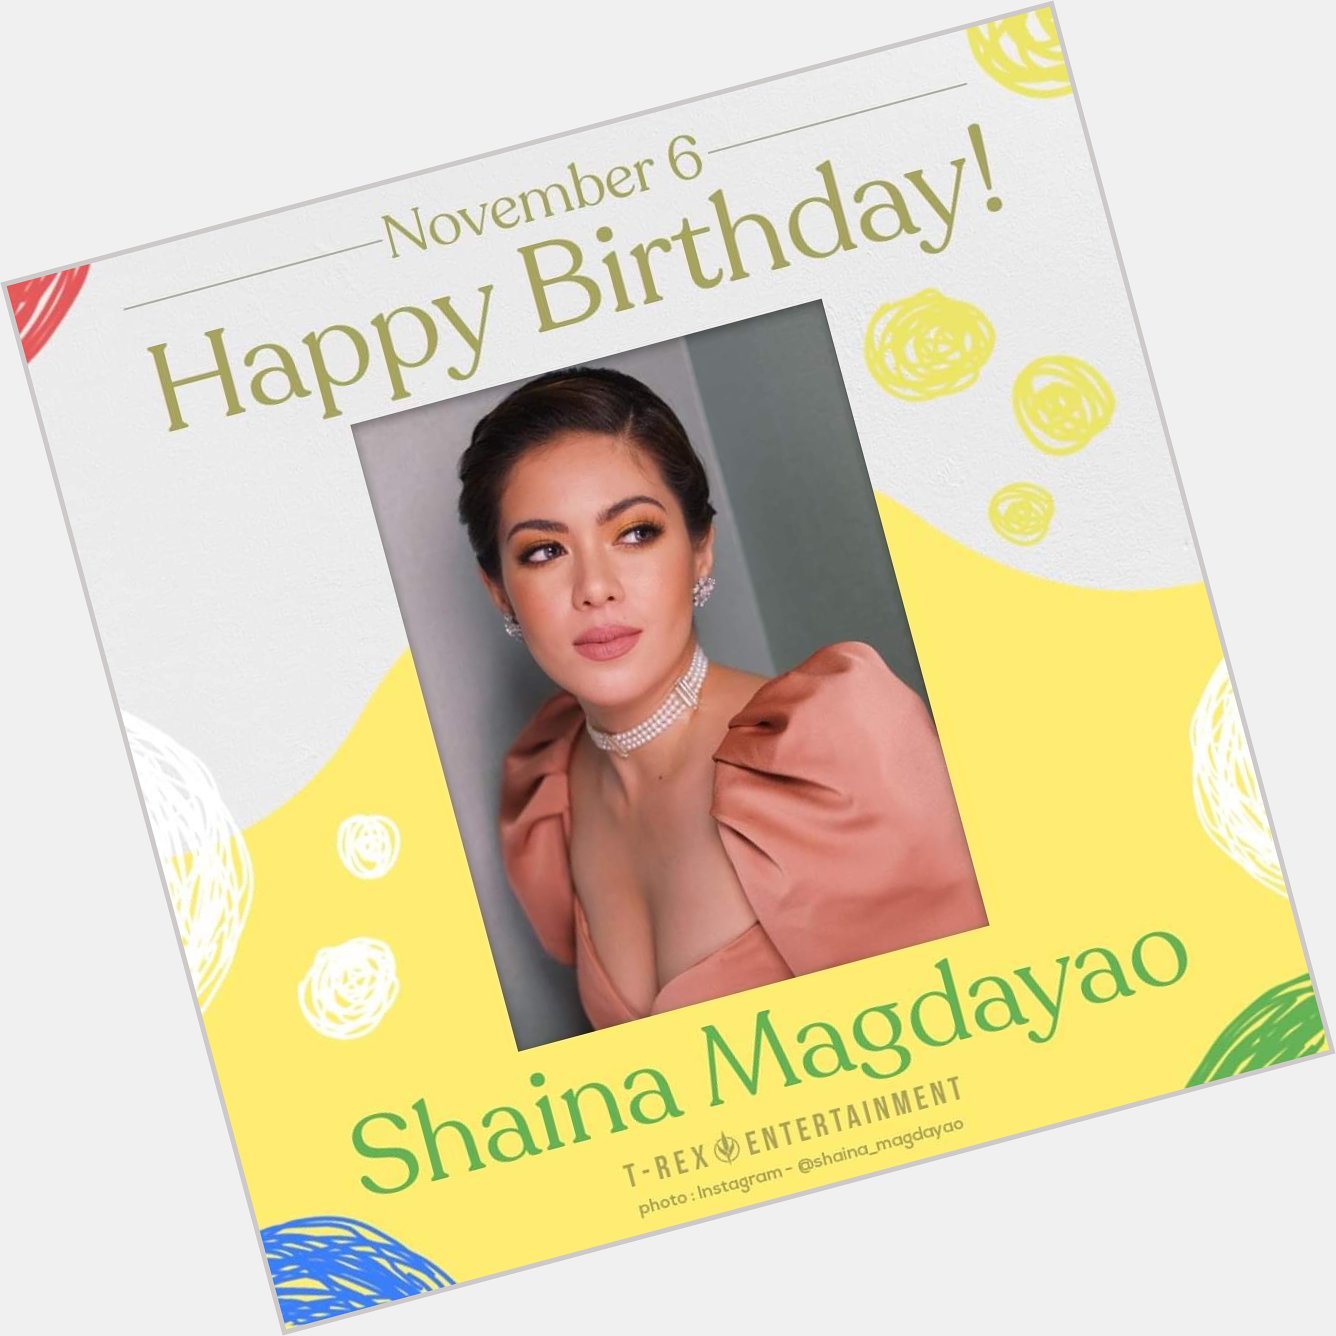 Happy 31st birthday, Shaina Magdayao! May you continue to shine as inspiration to others. 